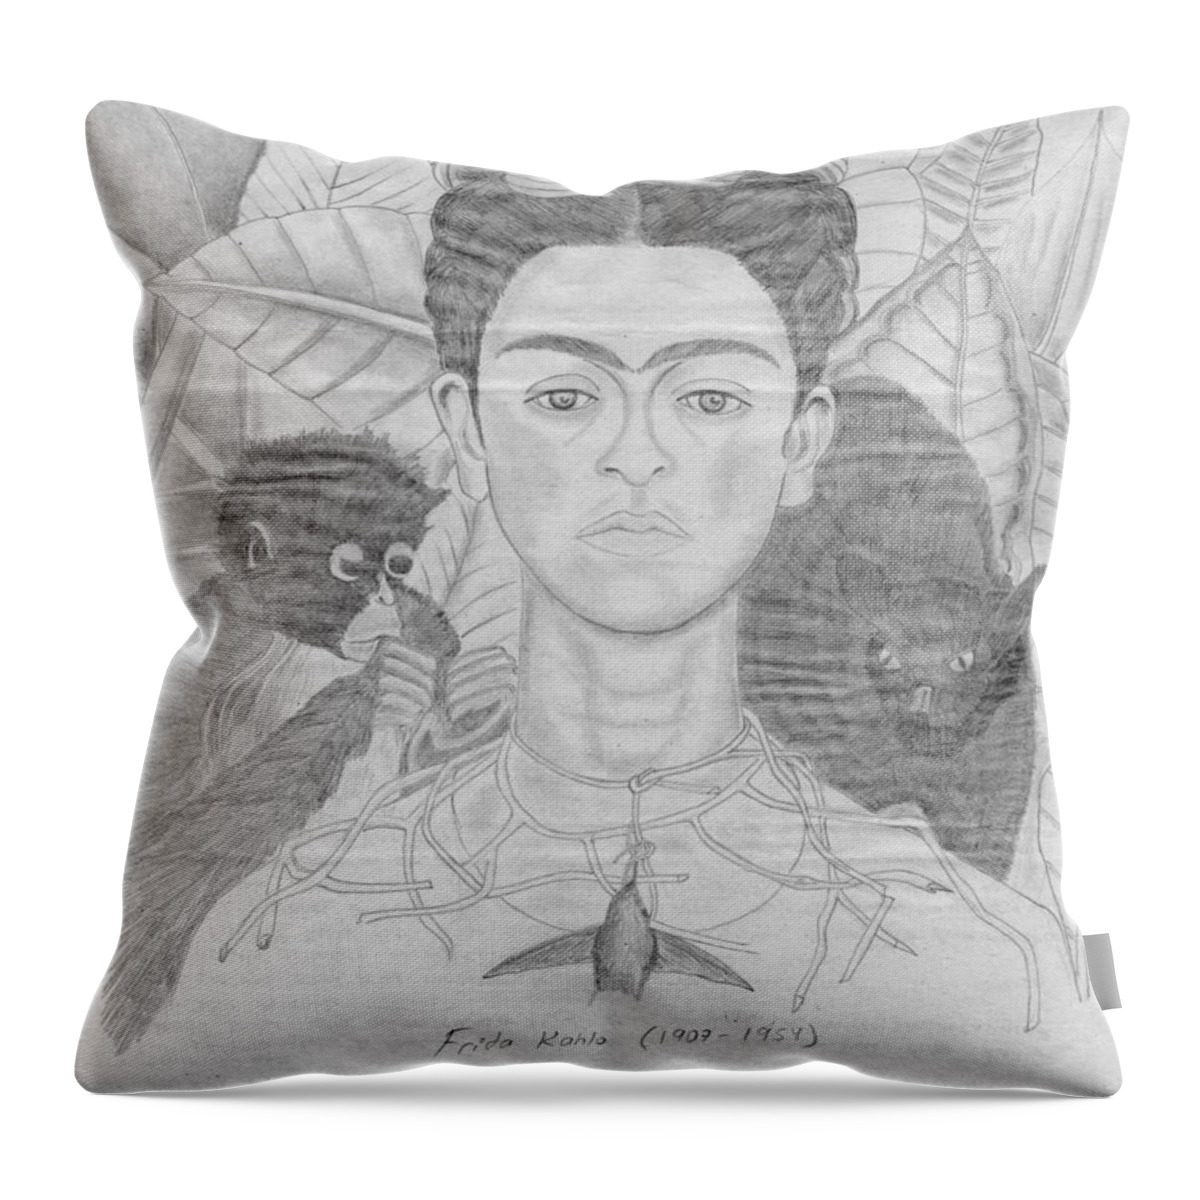 Graphite Throw Pillow featuring the drawing Frida Khalo by Martin Valeriano